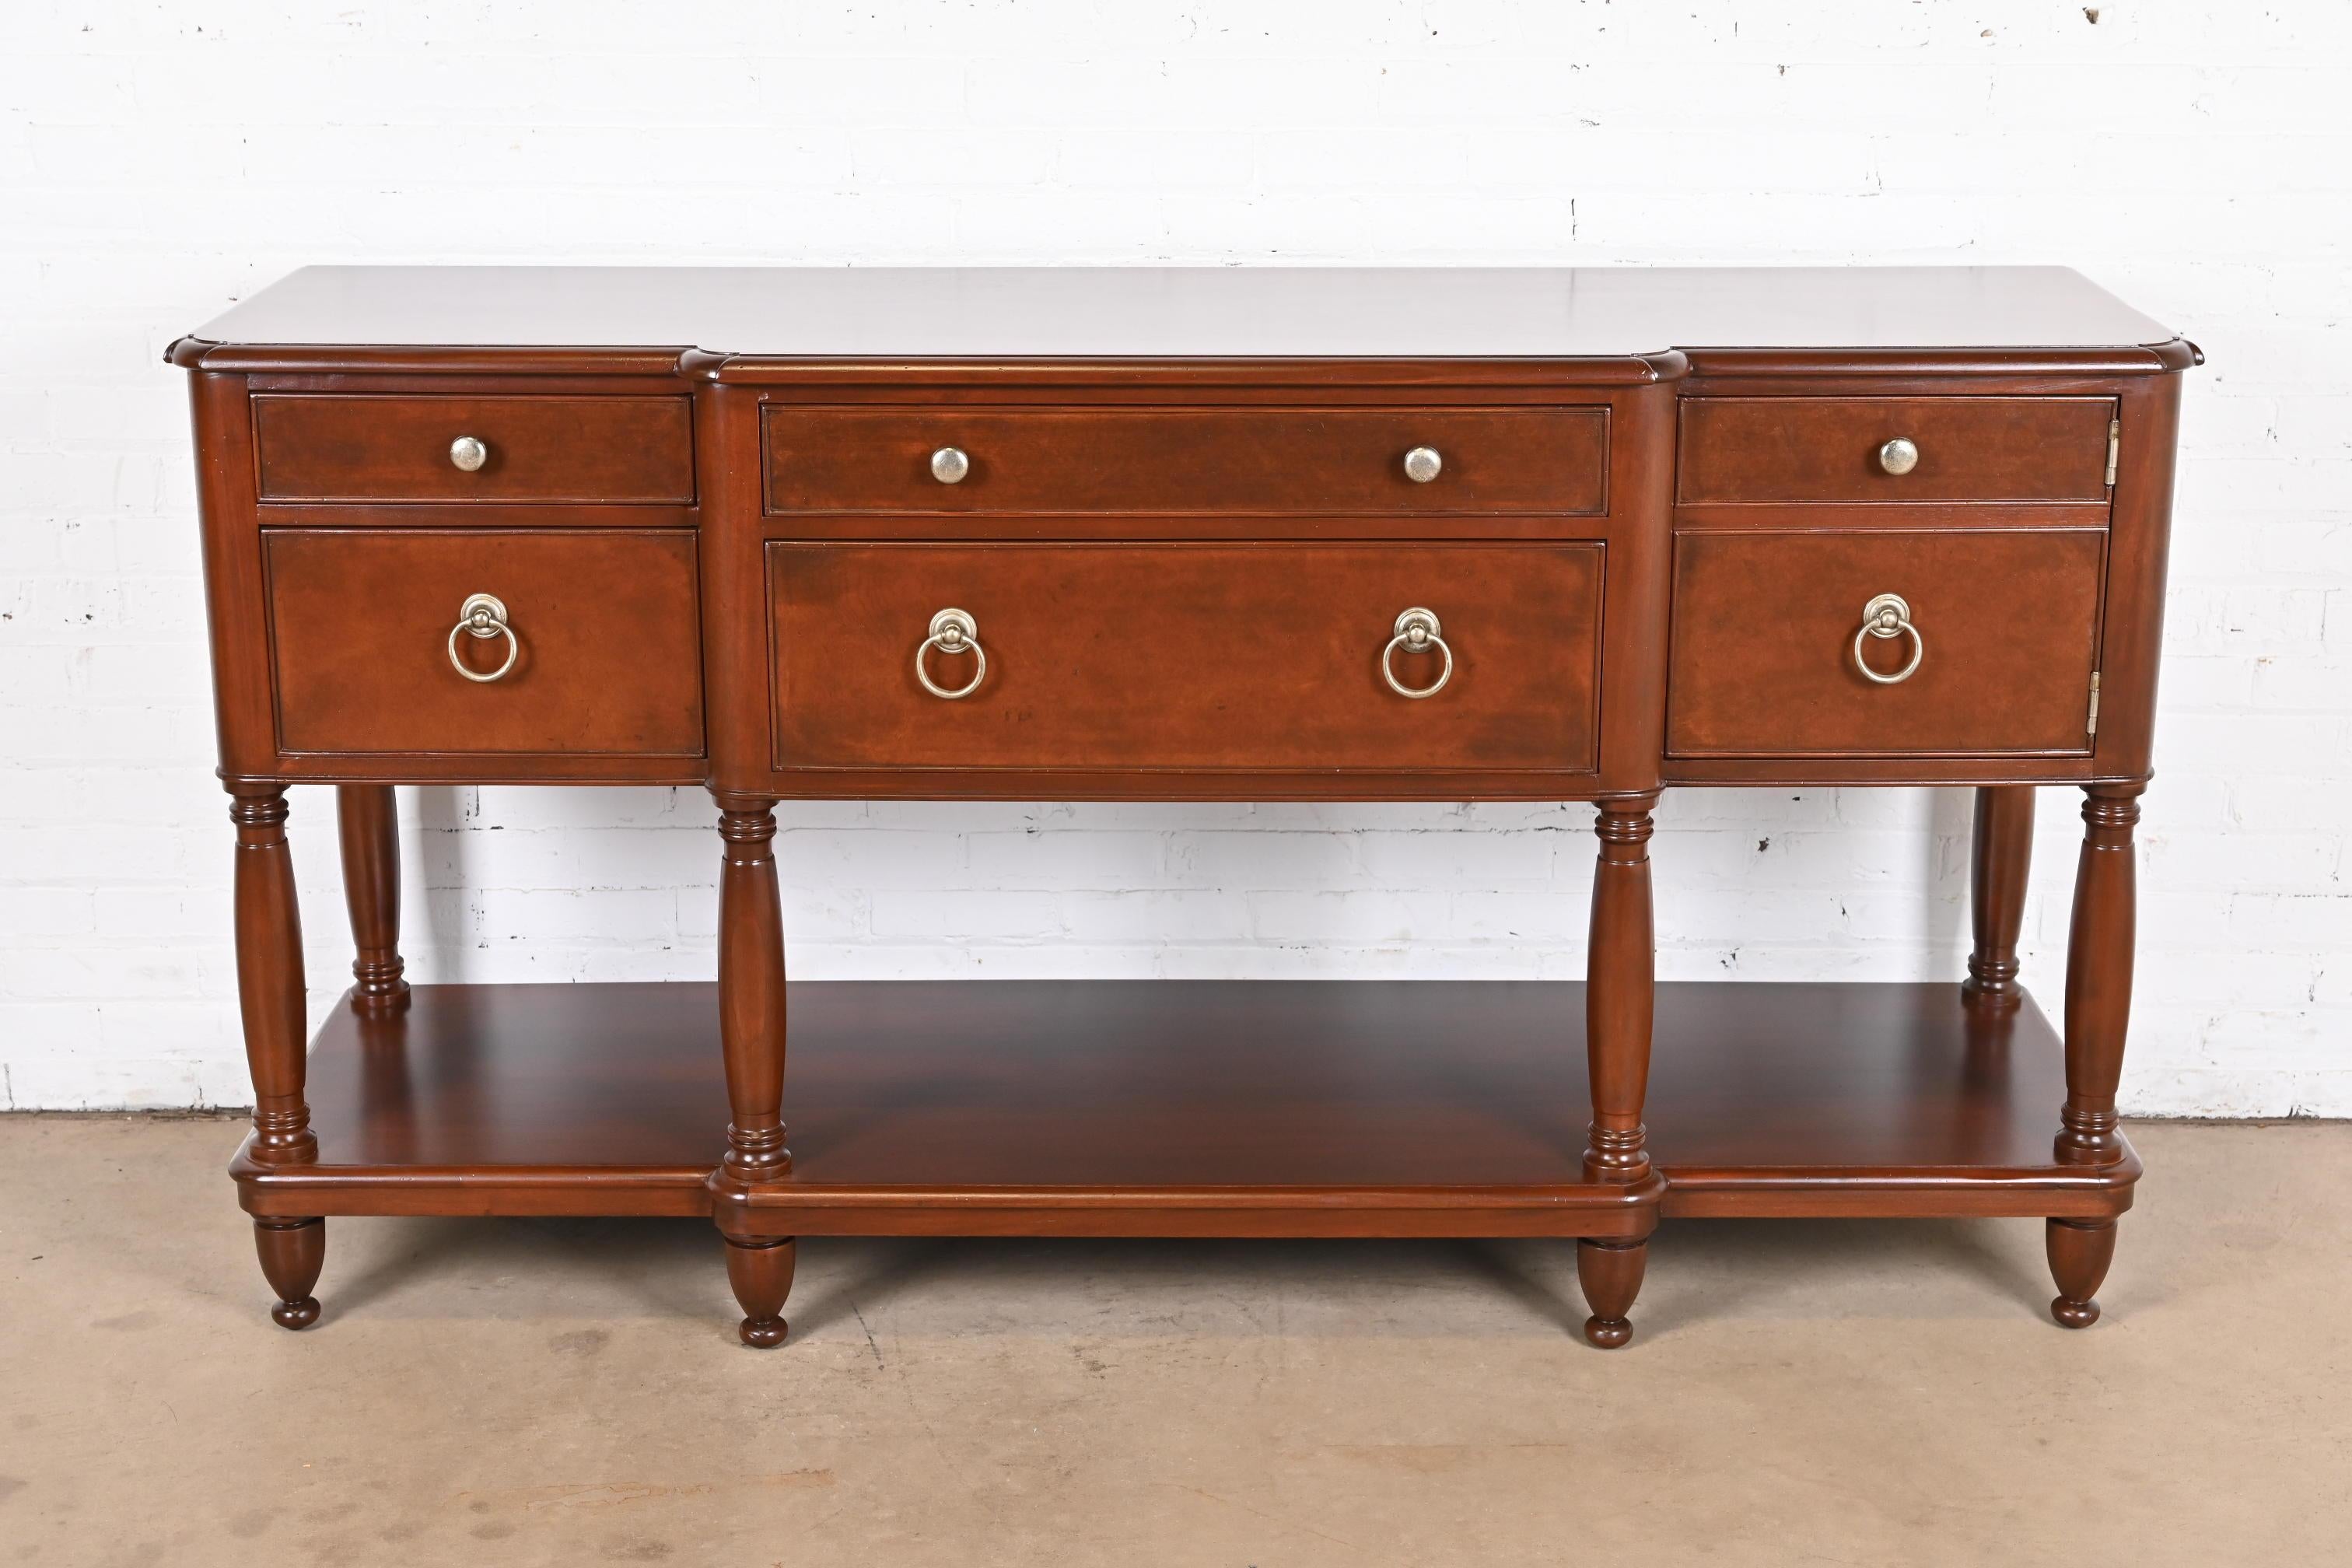 An exceptional Italian Provincial style breakfront sideboard, credenza, or bar cabinet

By Baker Furniture, 